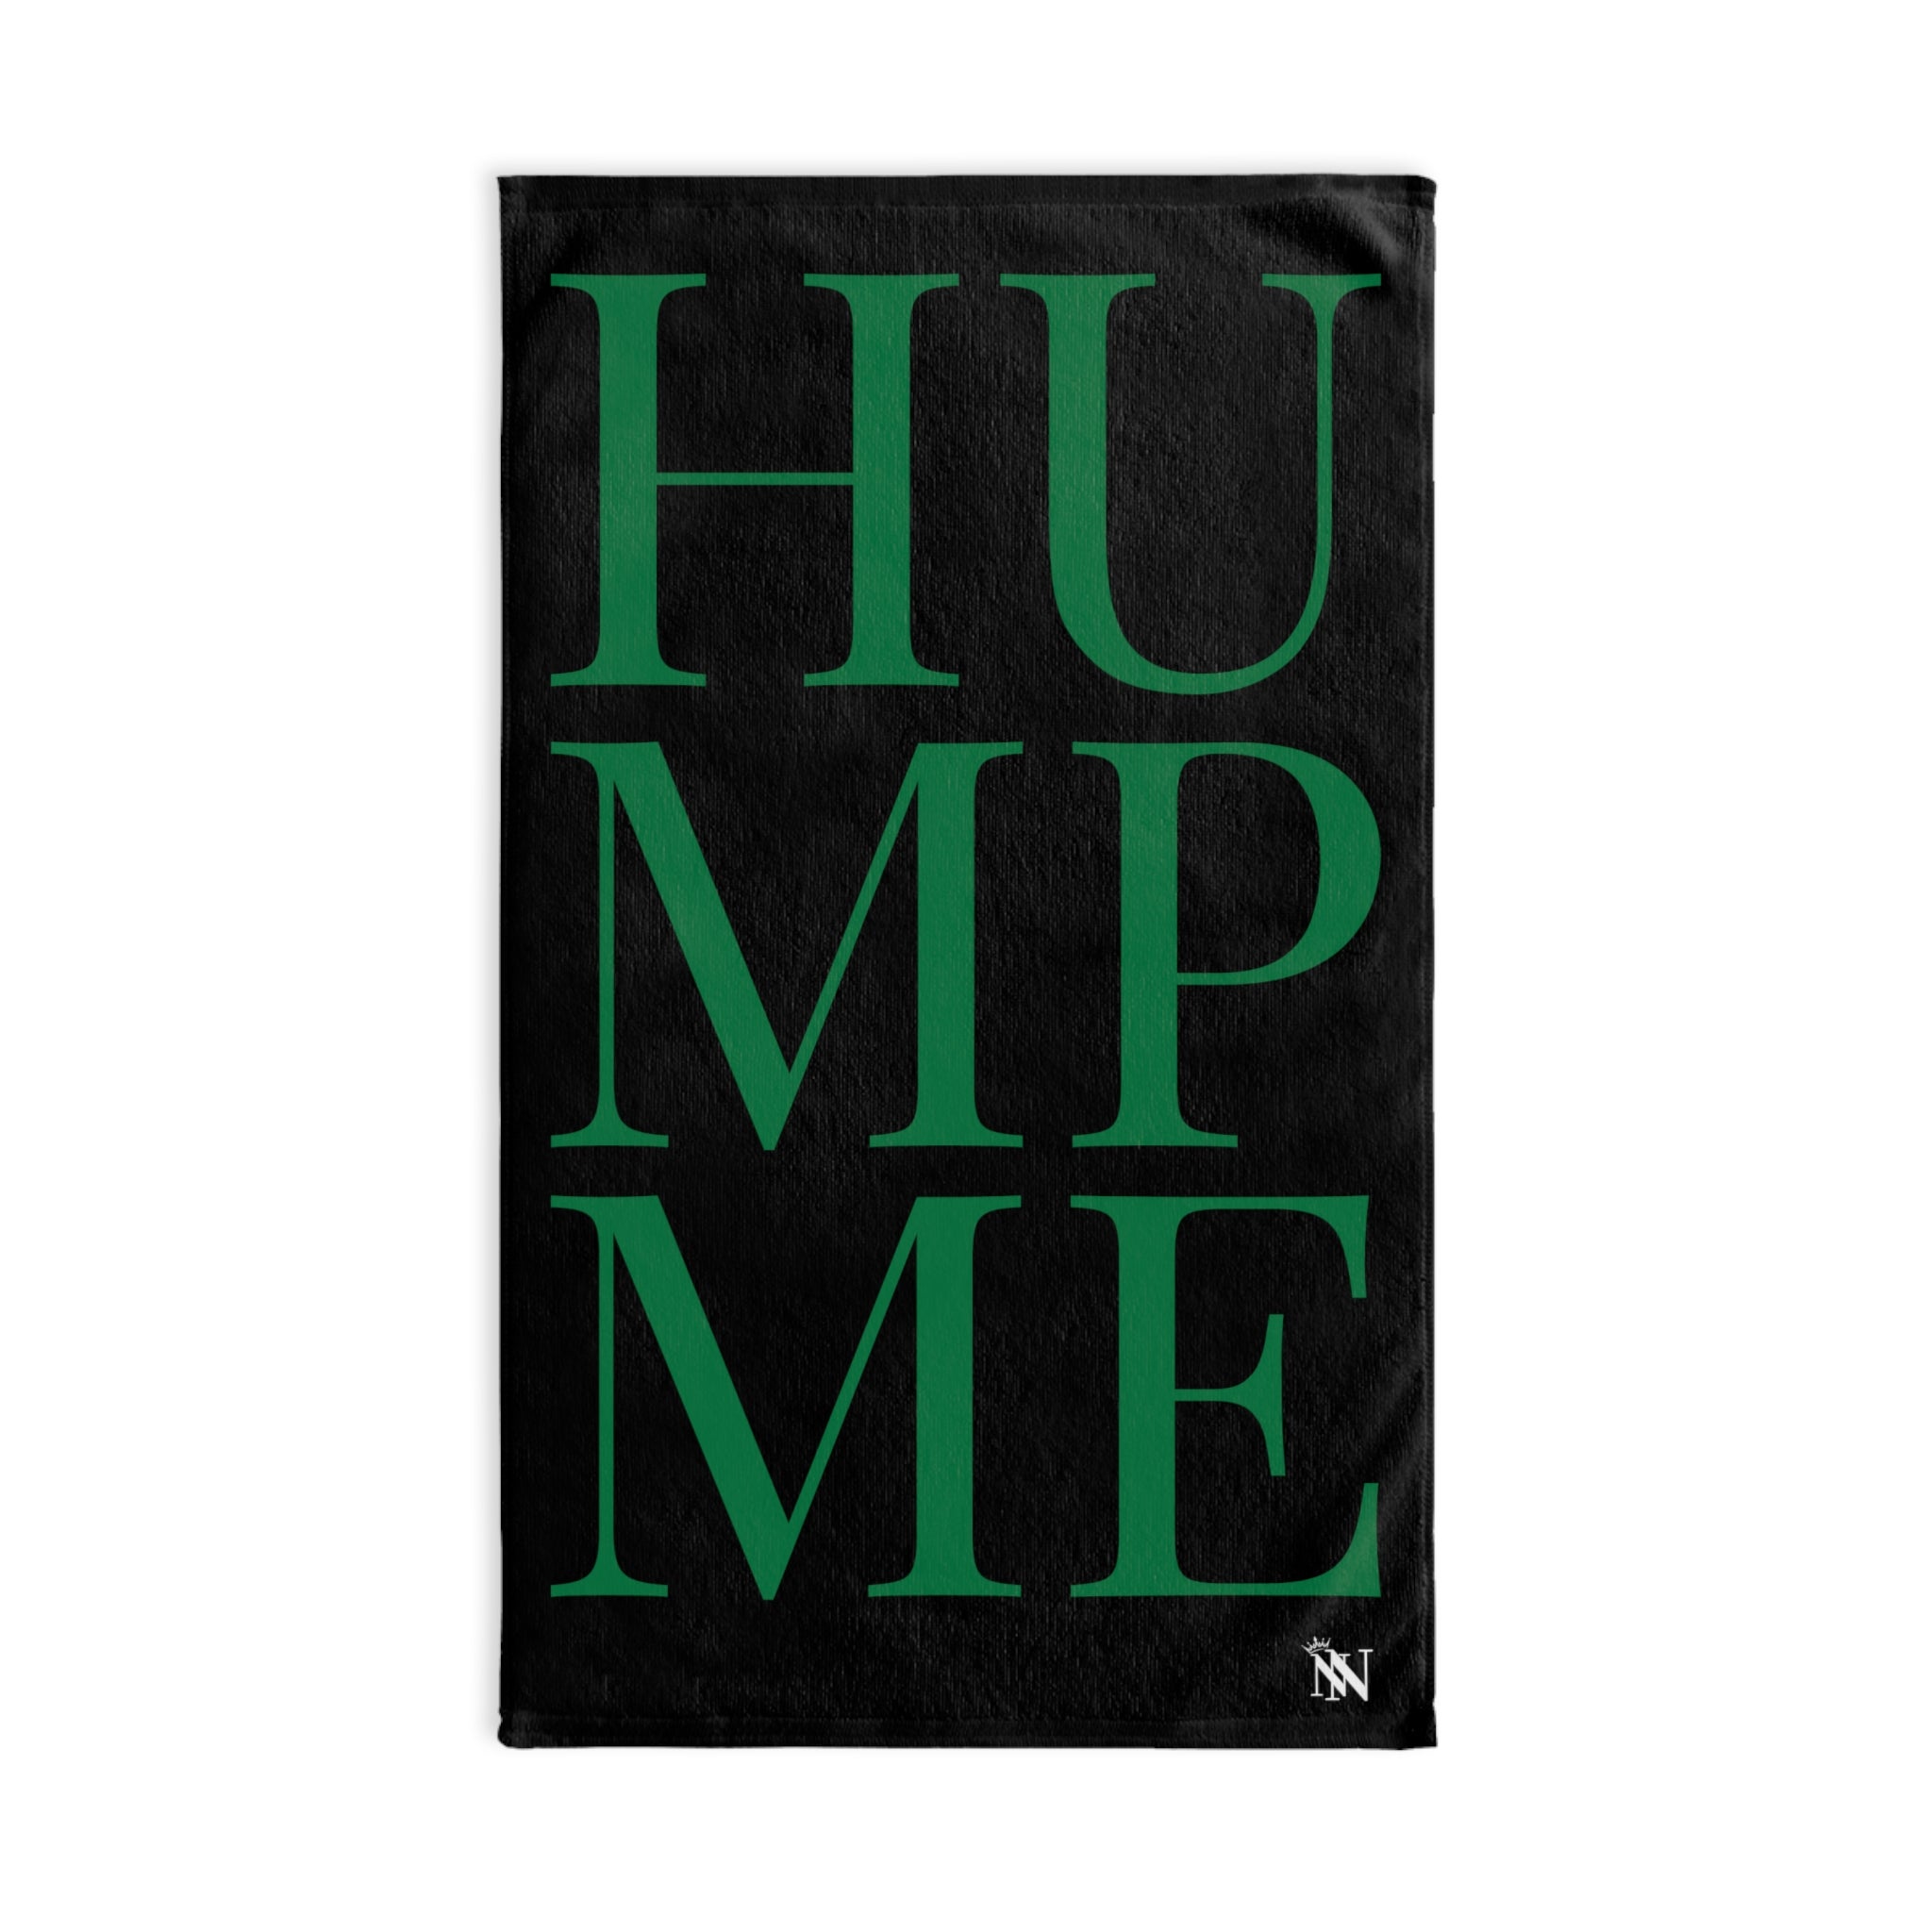 Hump Me Green Black | Sexy Gifts for Boyfriend, Funny Towel Romantic Gift for Wedding Couple Fiance First Year 2nd Anniversary Valentines, Party Gag Gifts, Joke Humor Cloth for Husband Men BF NECTAR NAPKINS